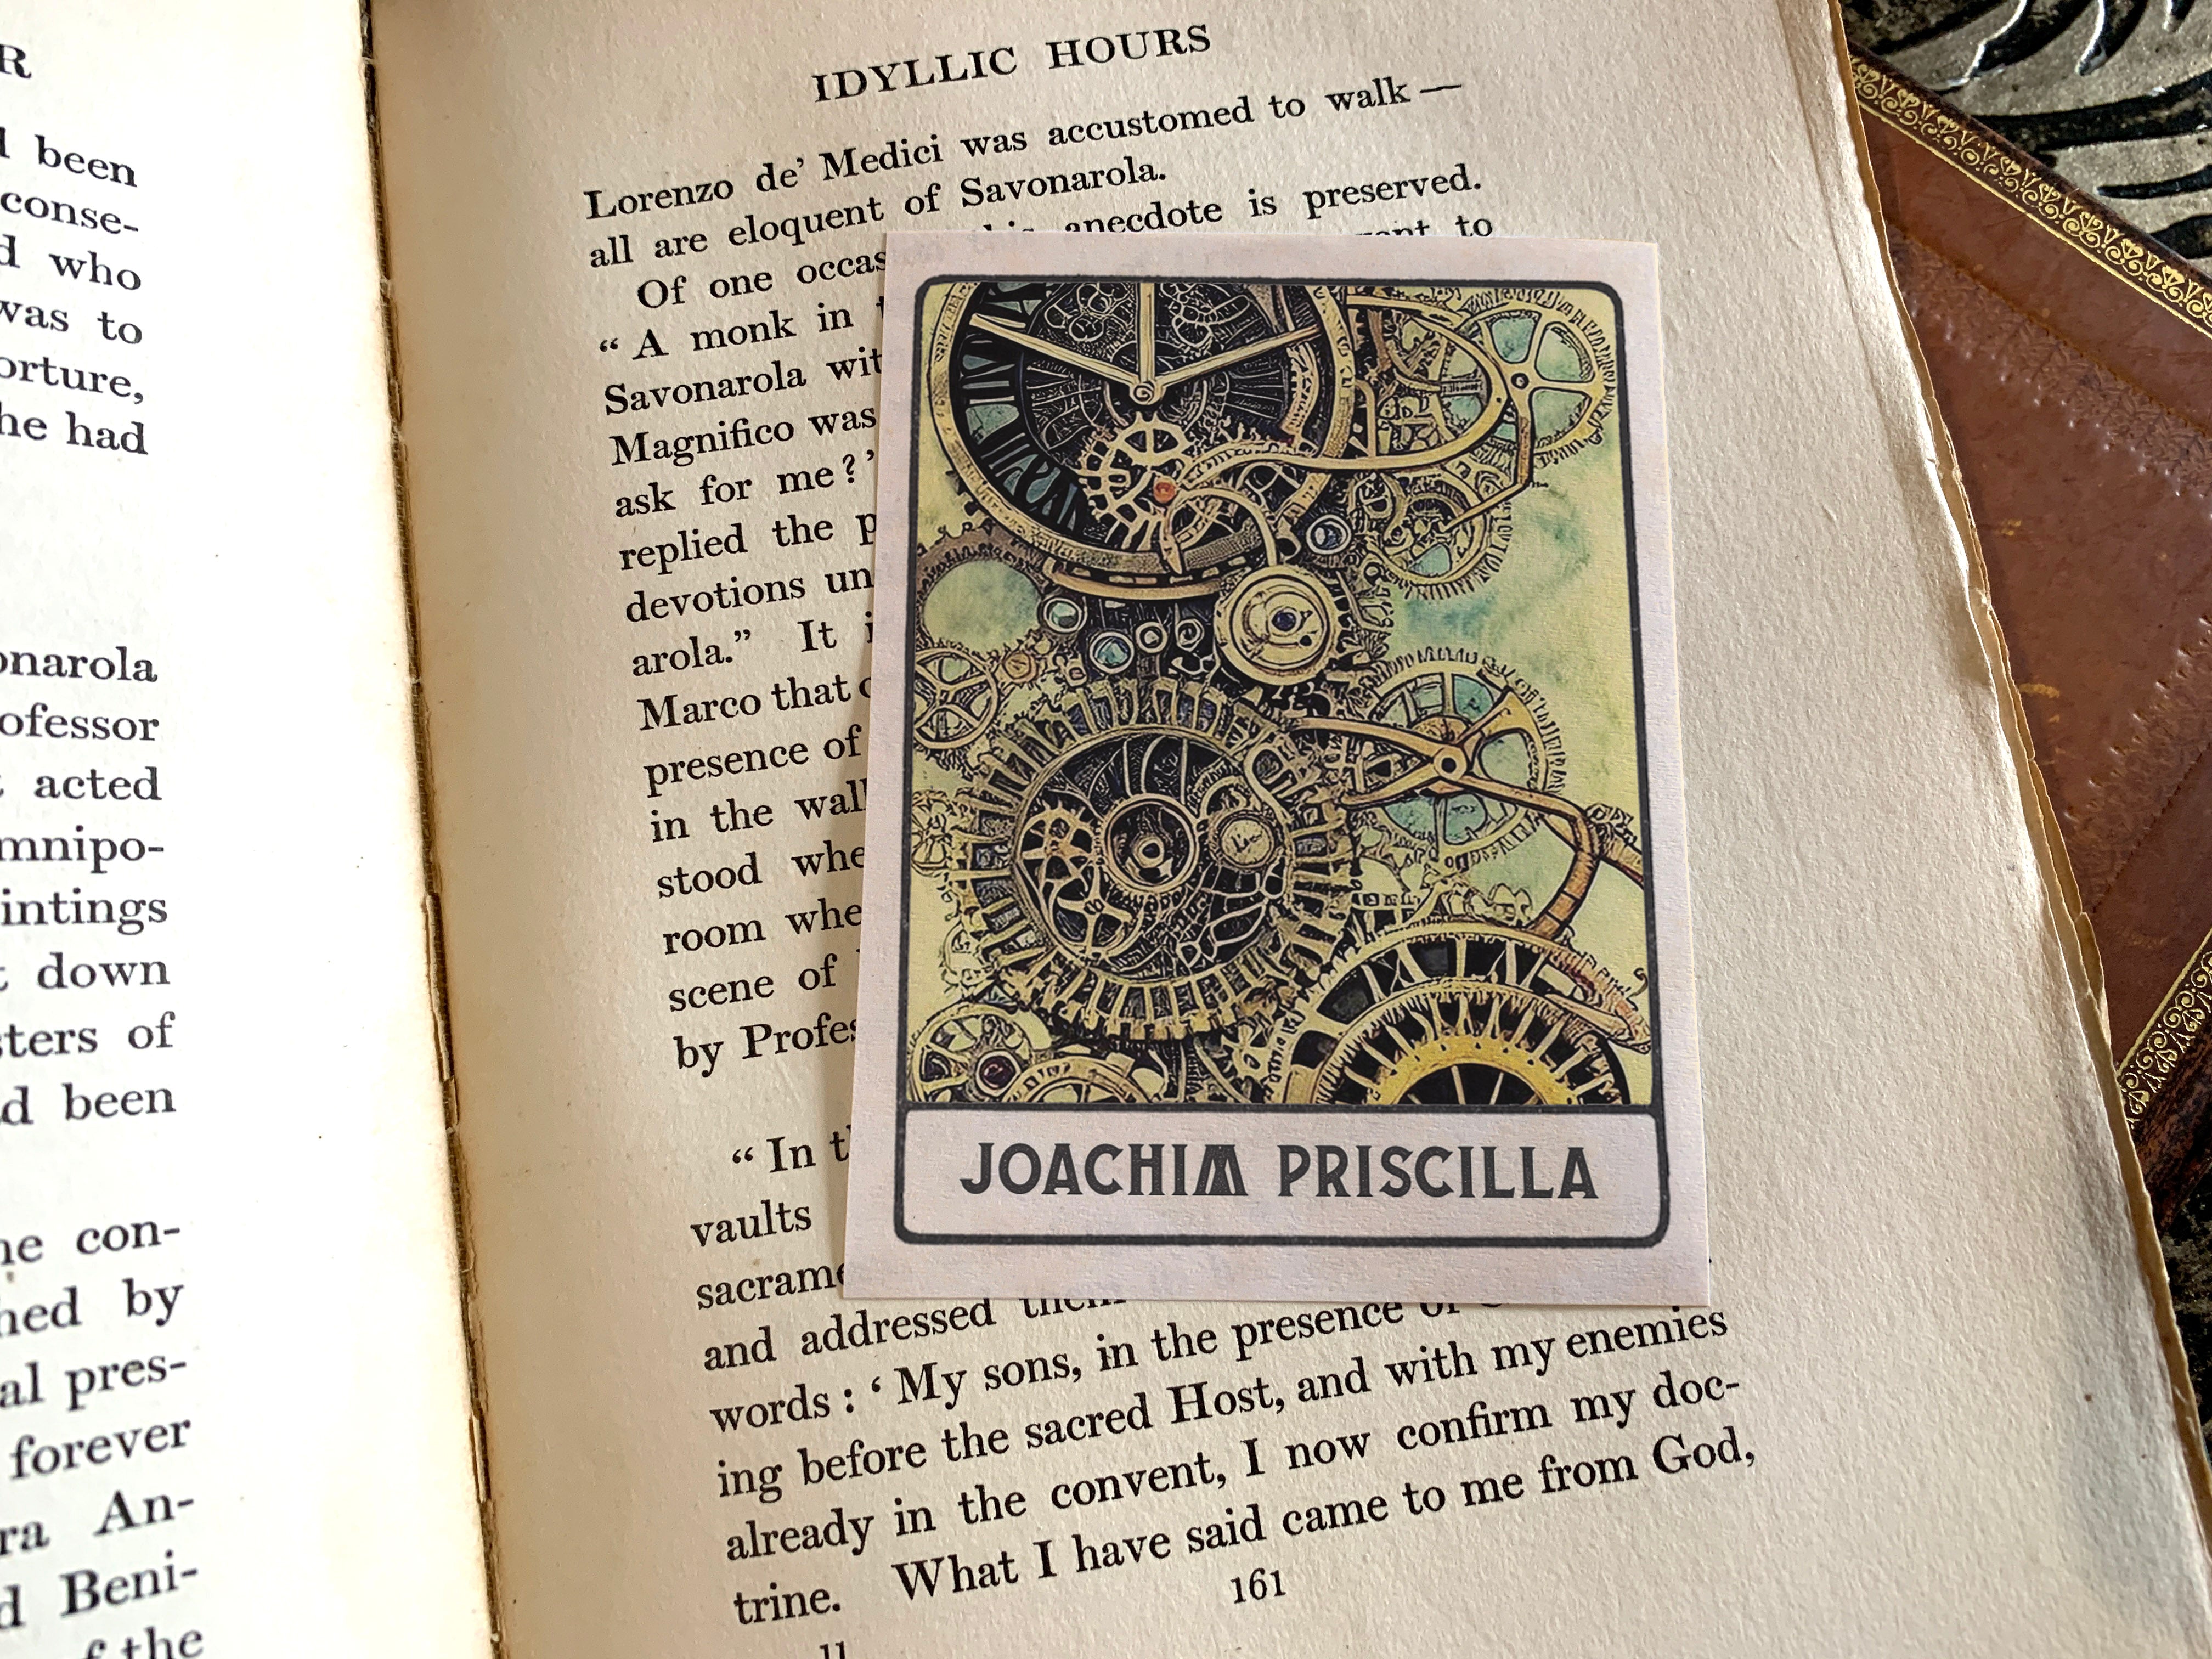 Steampunk Gears, Personalized Ex-Libris Bookplates, Crafted on Traditional Gummed Paper, 3in x 4in, Set of 30